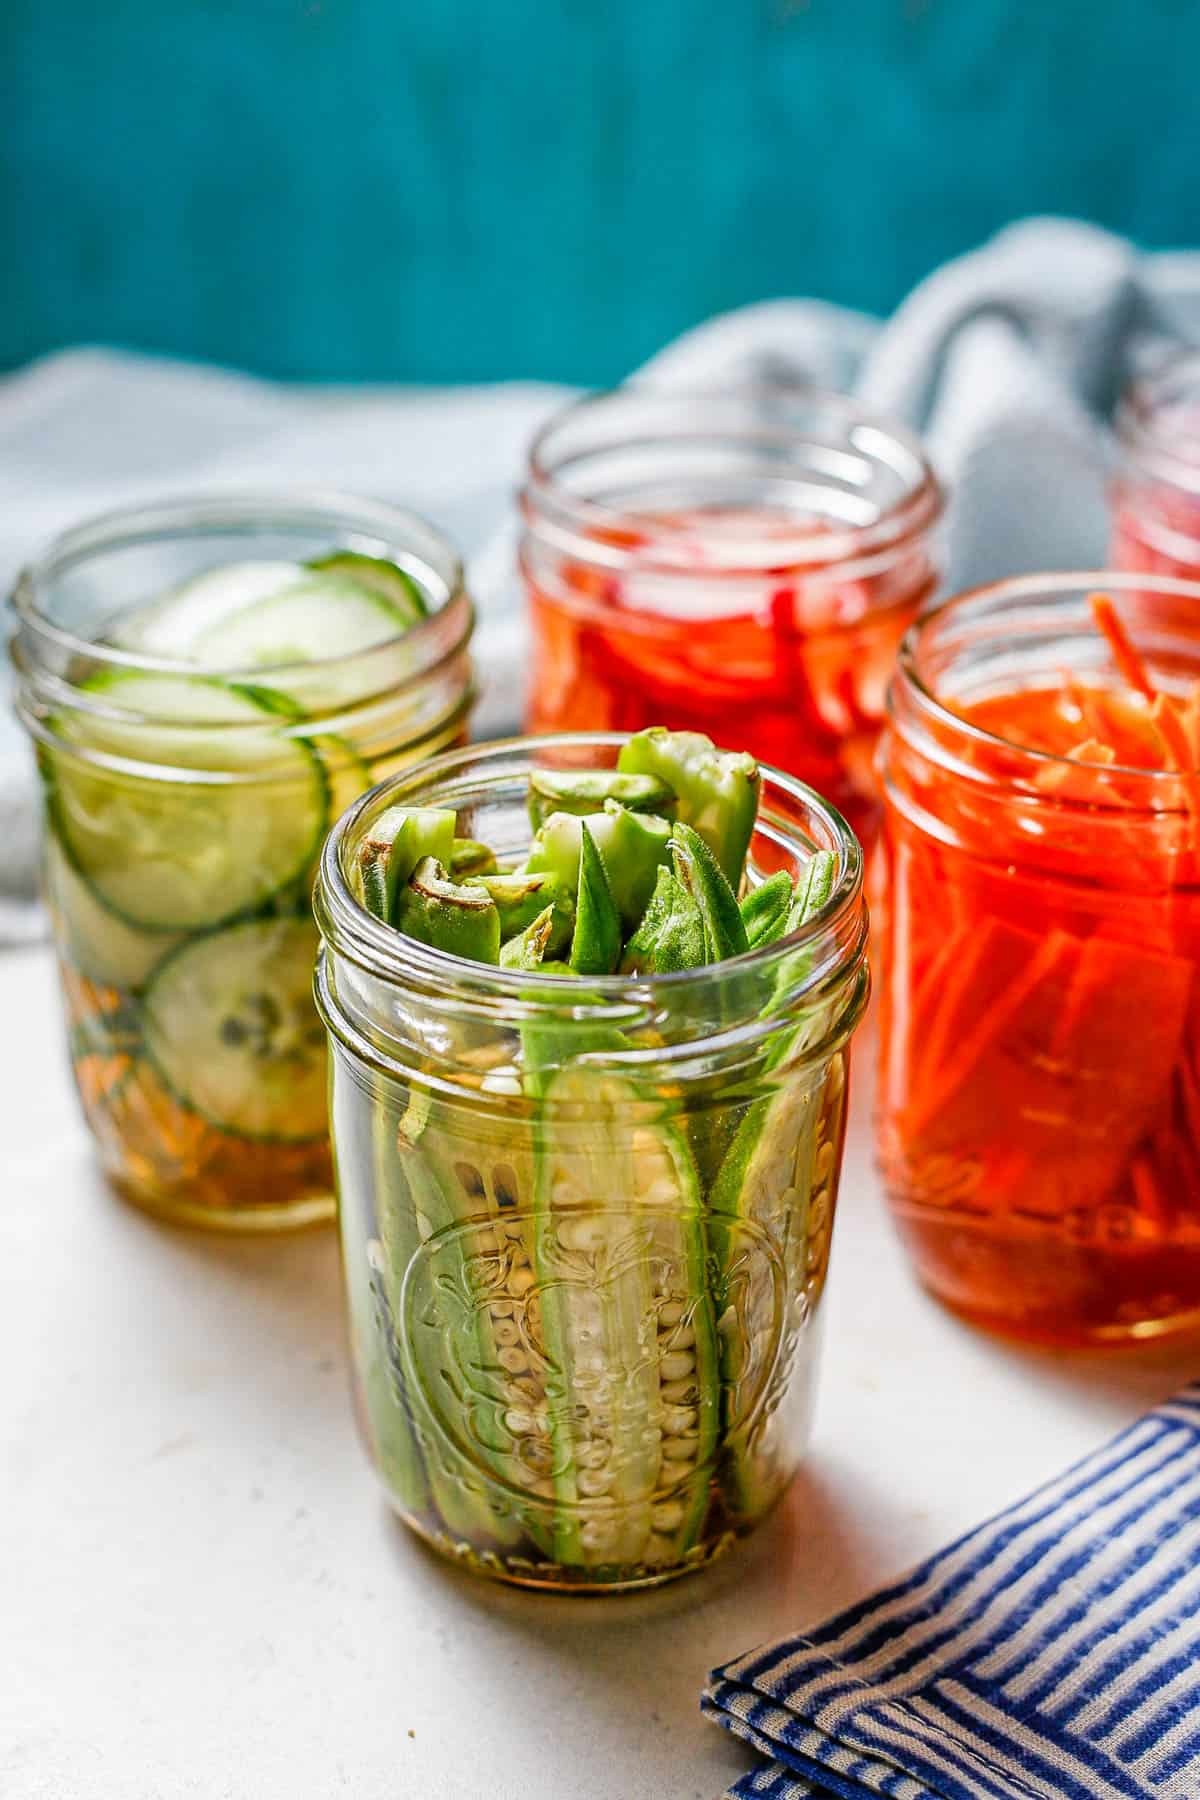 Pickled okra in a small glass jar with other pickled veggies in the background.